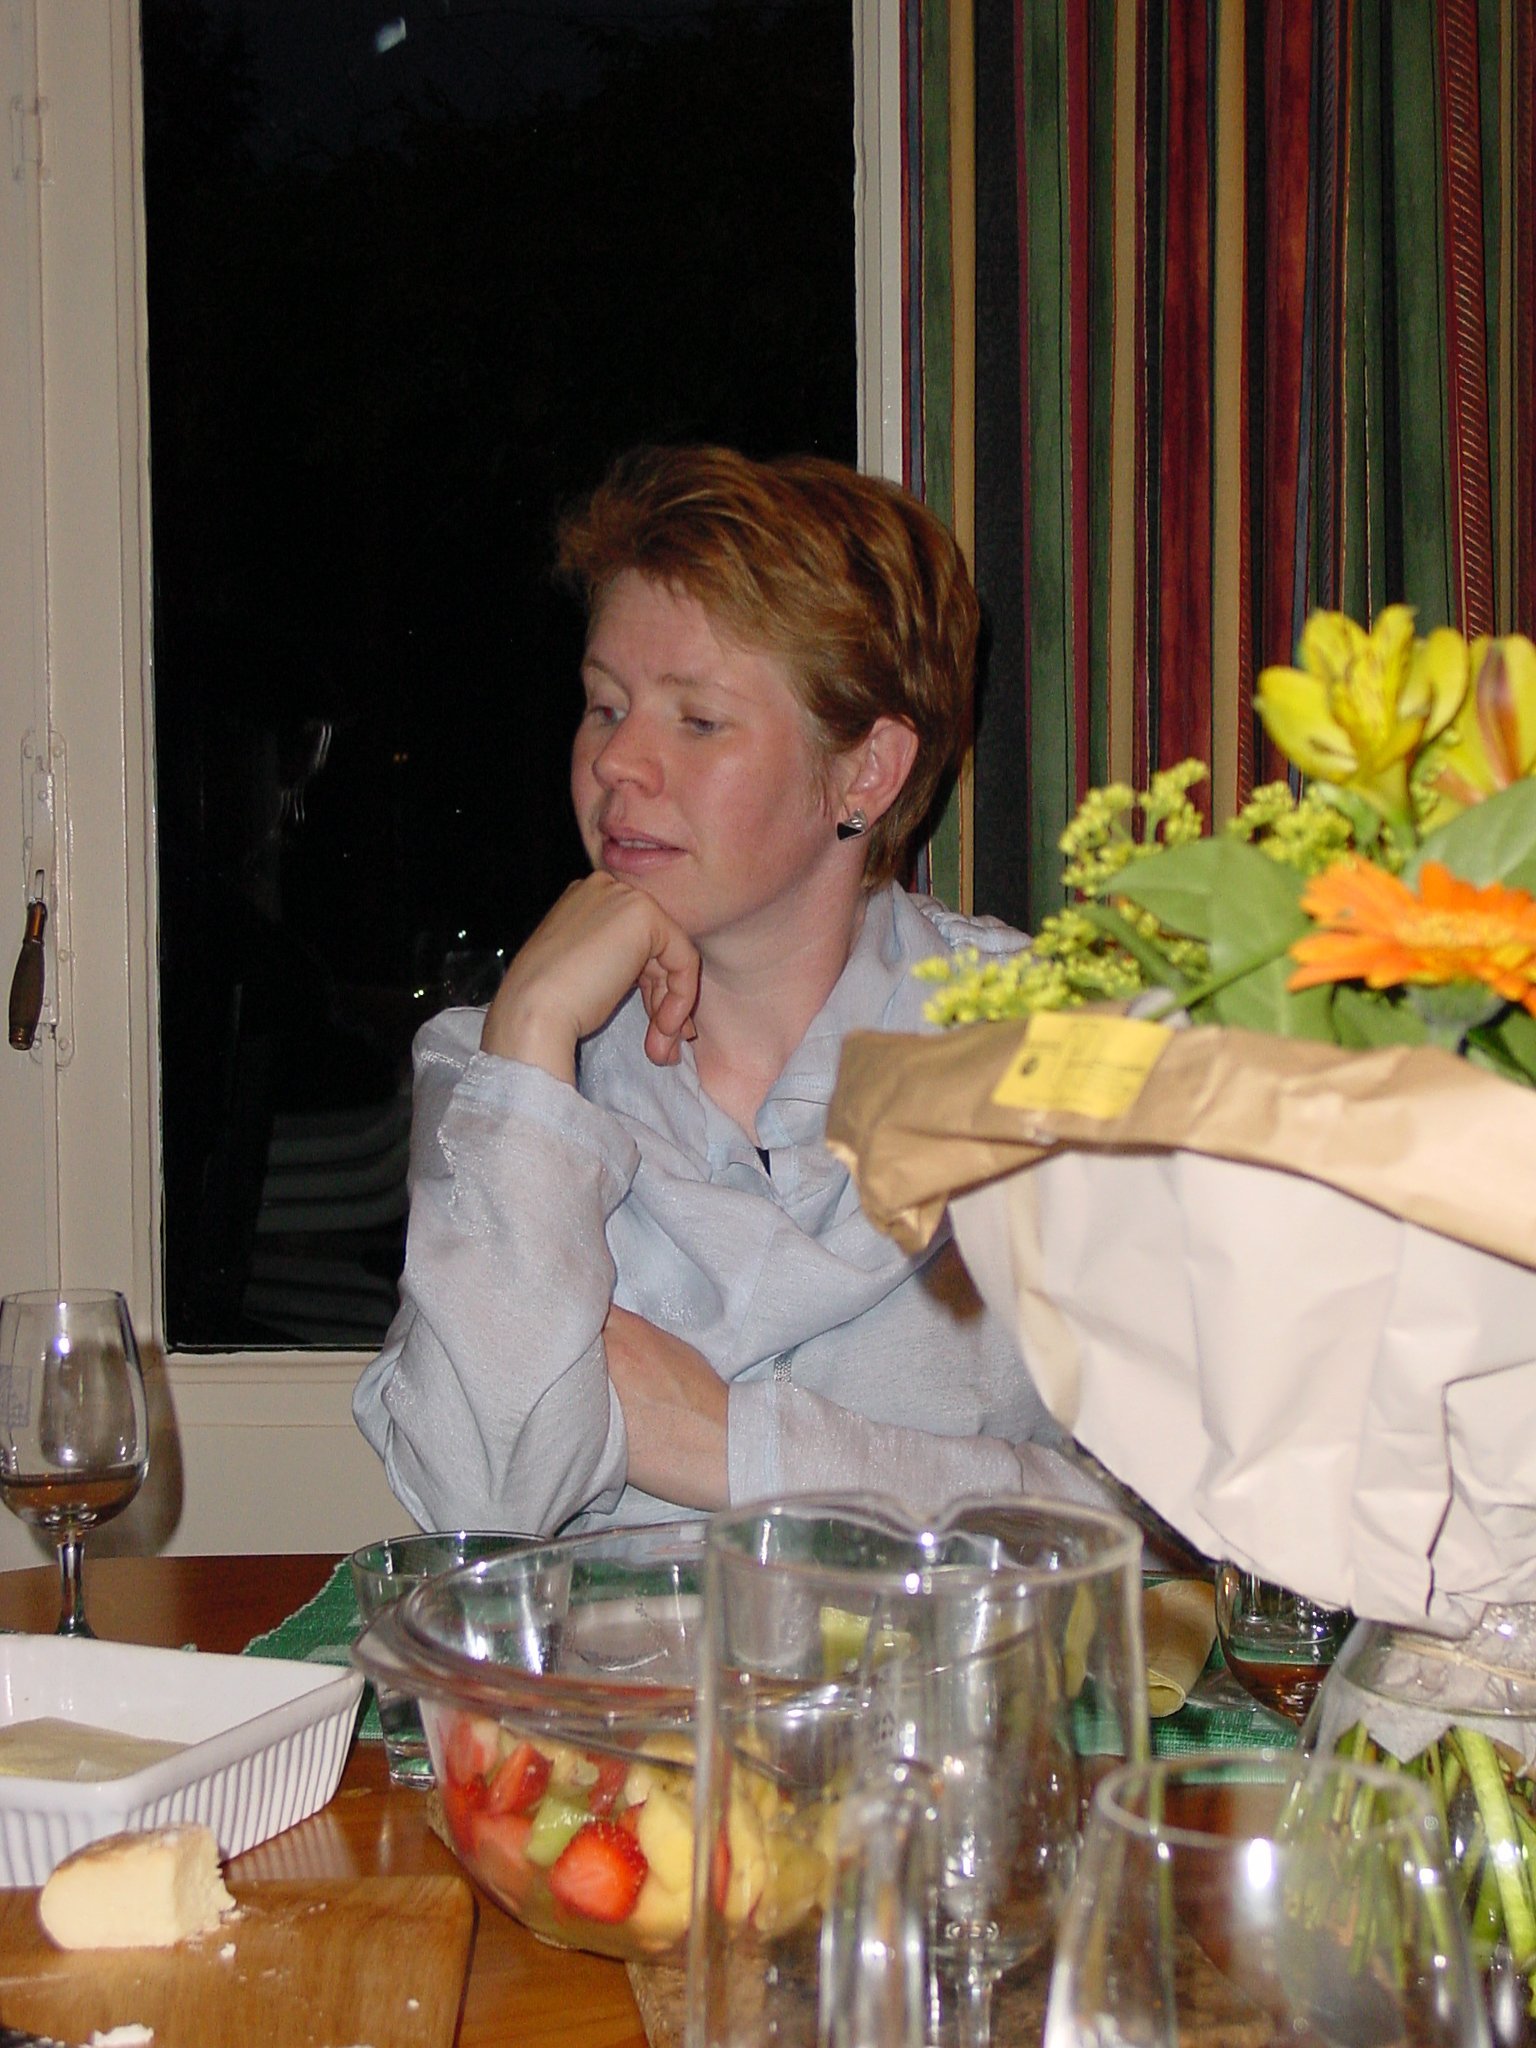 Ina, enjoyinmg a dinner with friends; Mdium size=240 pixels wide